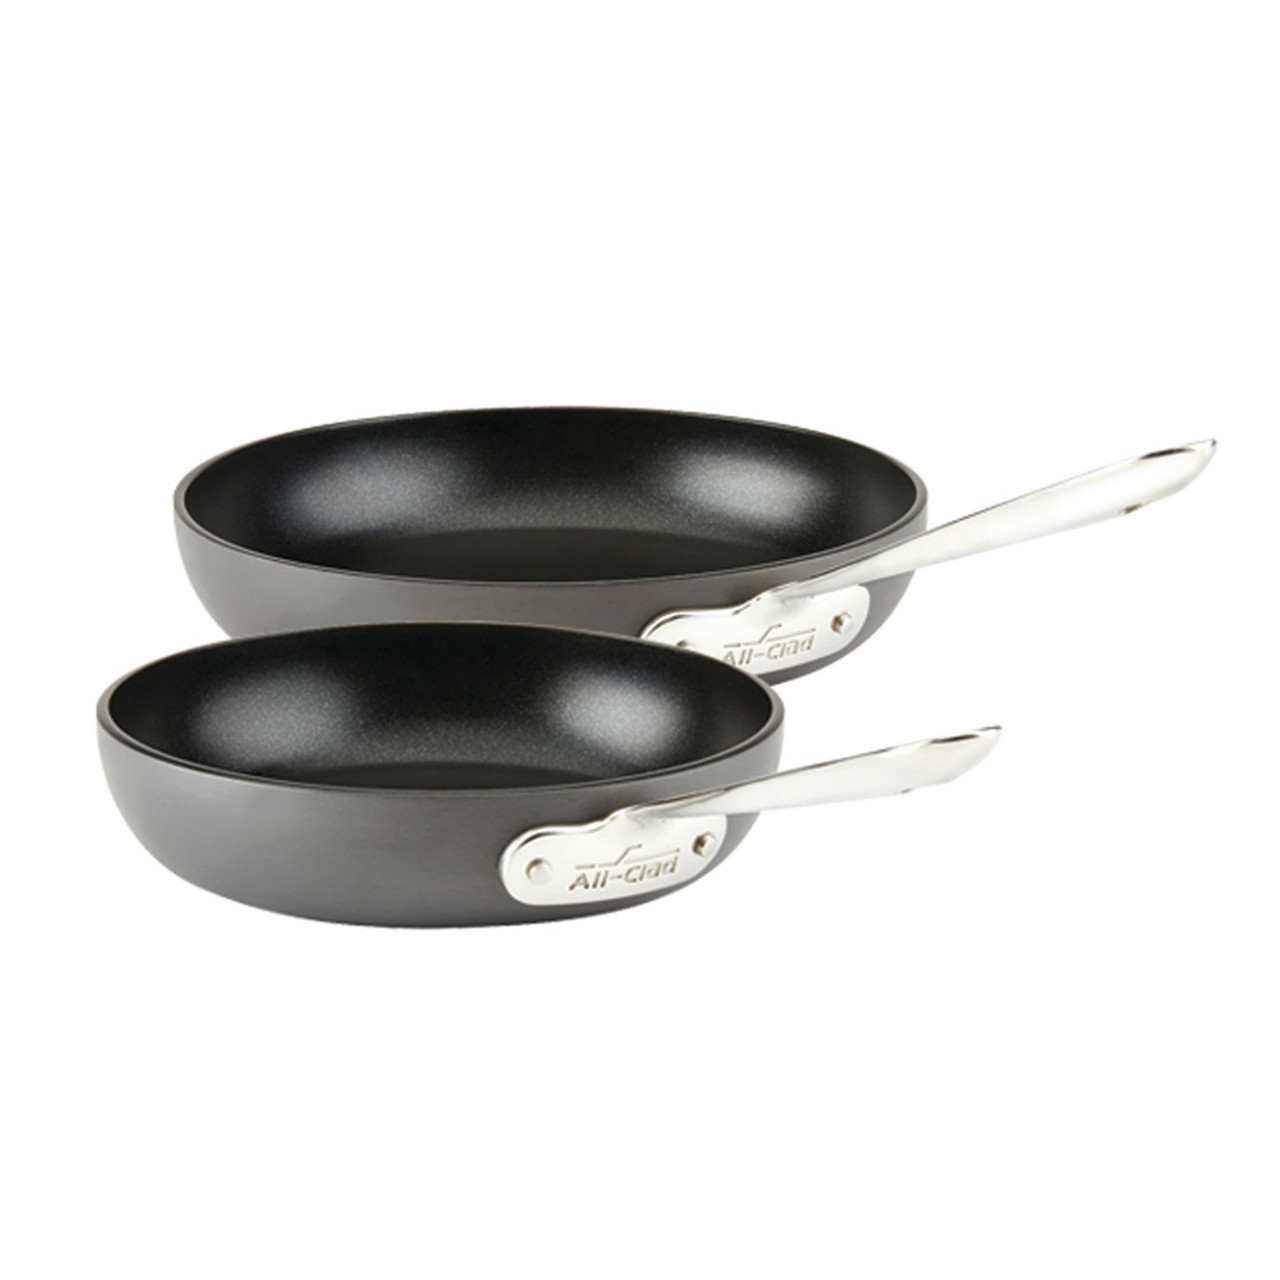 https://cdn11.bigcommerce.com/s-hccytny0od/images/stencil/1280x1280/products/518/8395/all-clad-ha1-8-10-inch-fry-pan-set__87966.1595949308.jpg?c=2?imbypass=on